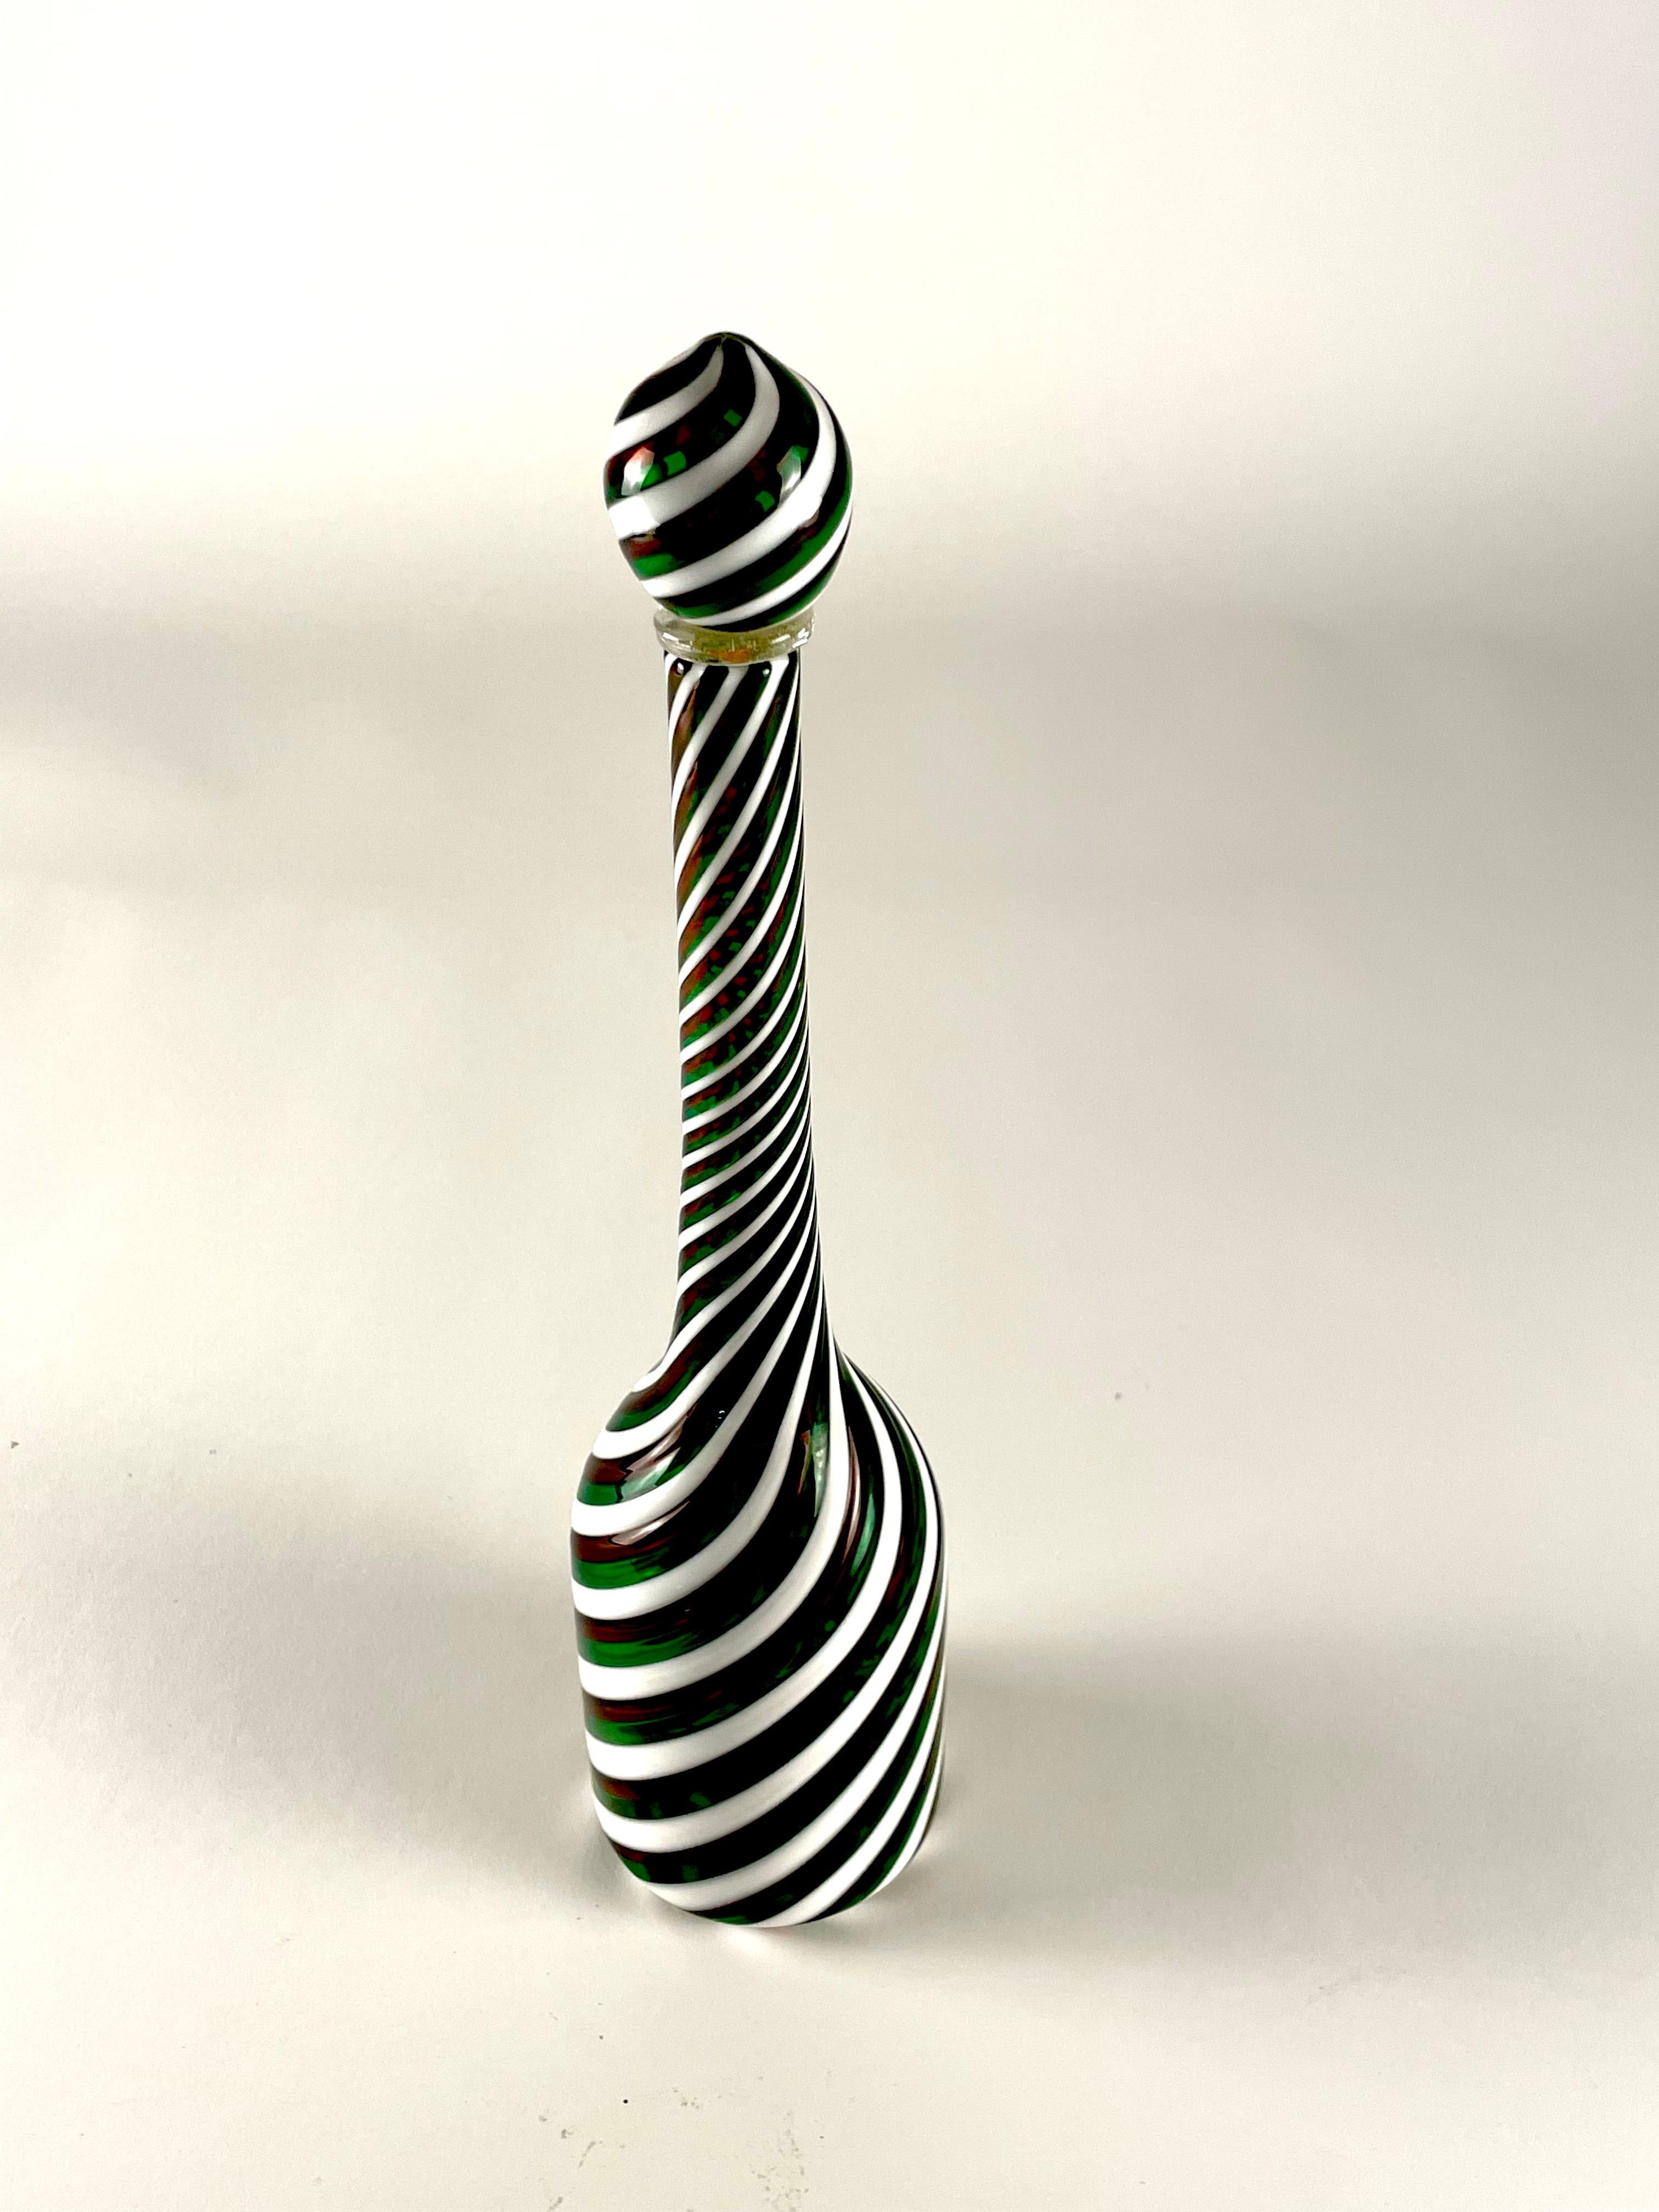 This bottle is handcrafted by renowned maestro Bruno Fornasier for Fratelli Toso glass factory. This stunning piece captures the essence of Murano glass artistry, produced in the '80s; it is realized by using the technique of juxtaposing colored